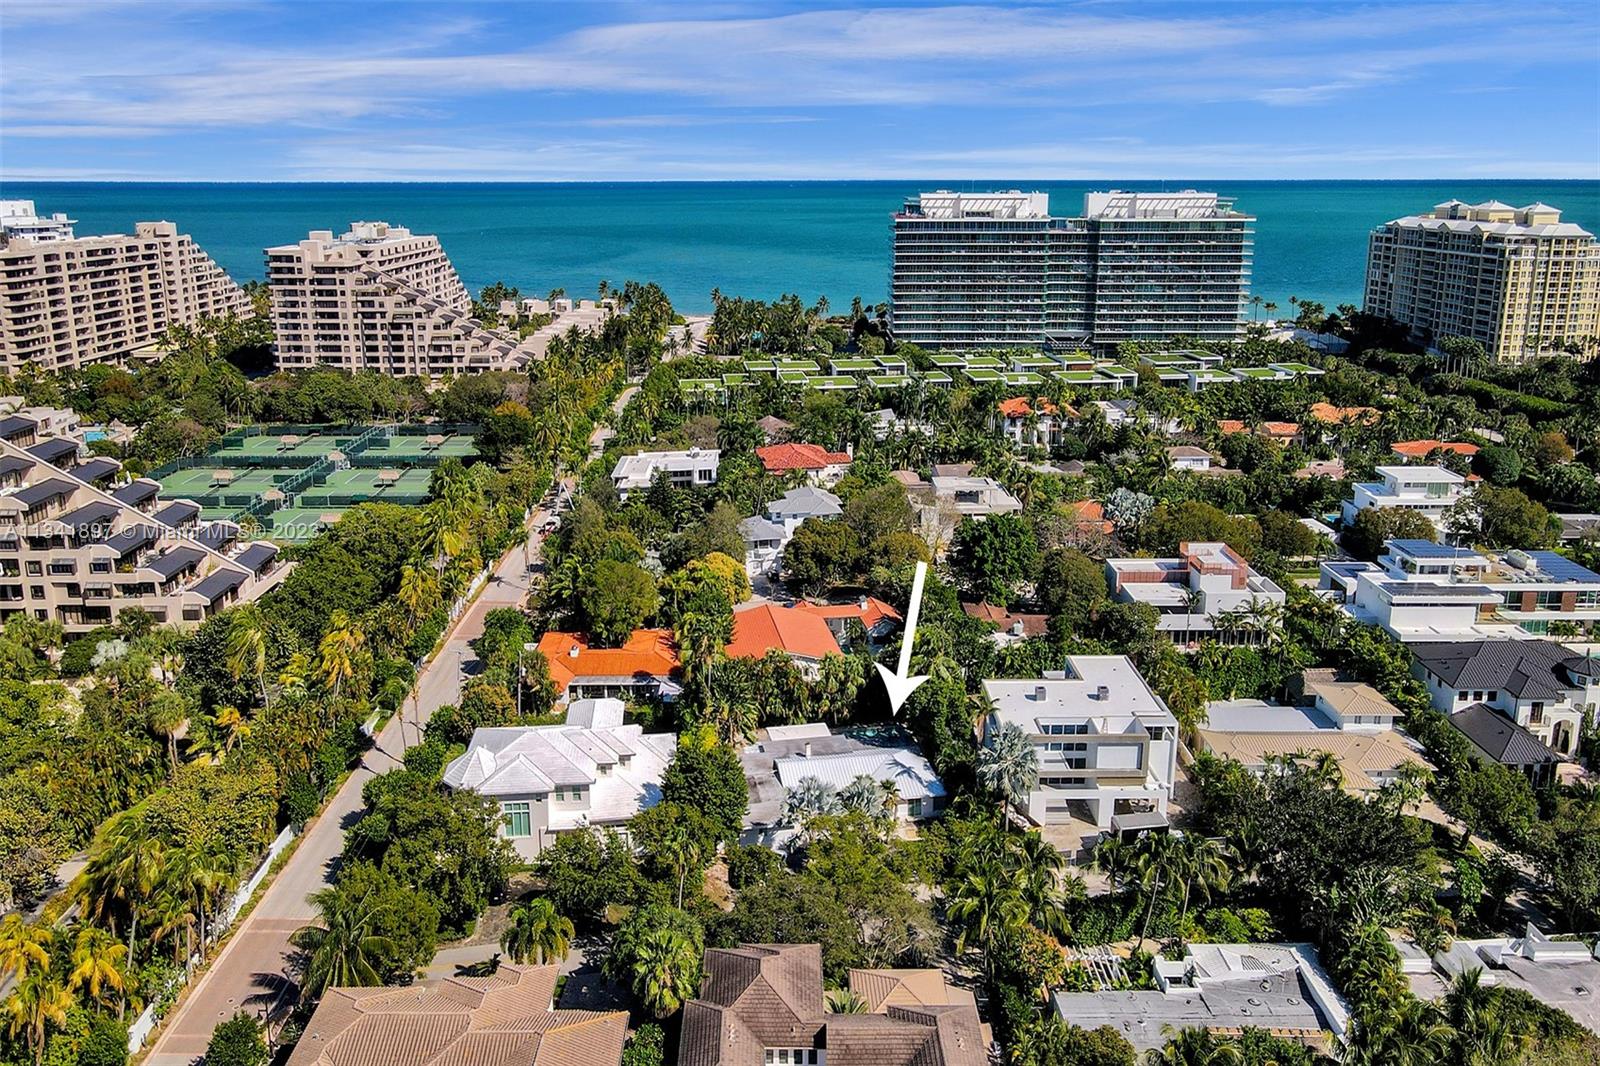 Amazing single home on an oversized 12,288 SF lot just 3 blocks from the beach and 2 blocks from the Village Green Park in Key Biscayne. This one-story home is located in the Holiday Colony, the closest neighborhood for single homes with access to the beach. Imperdible opportunity!.